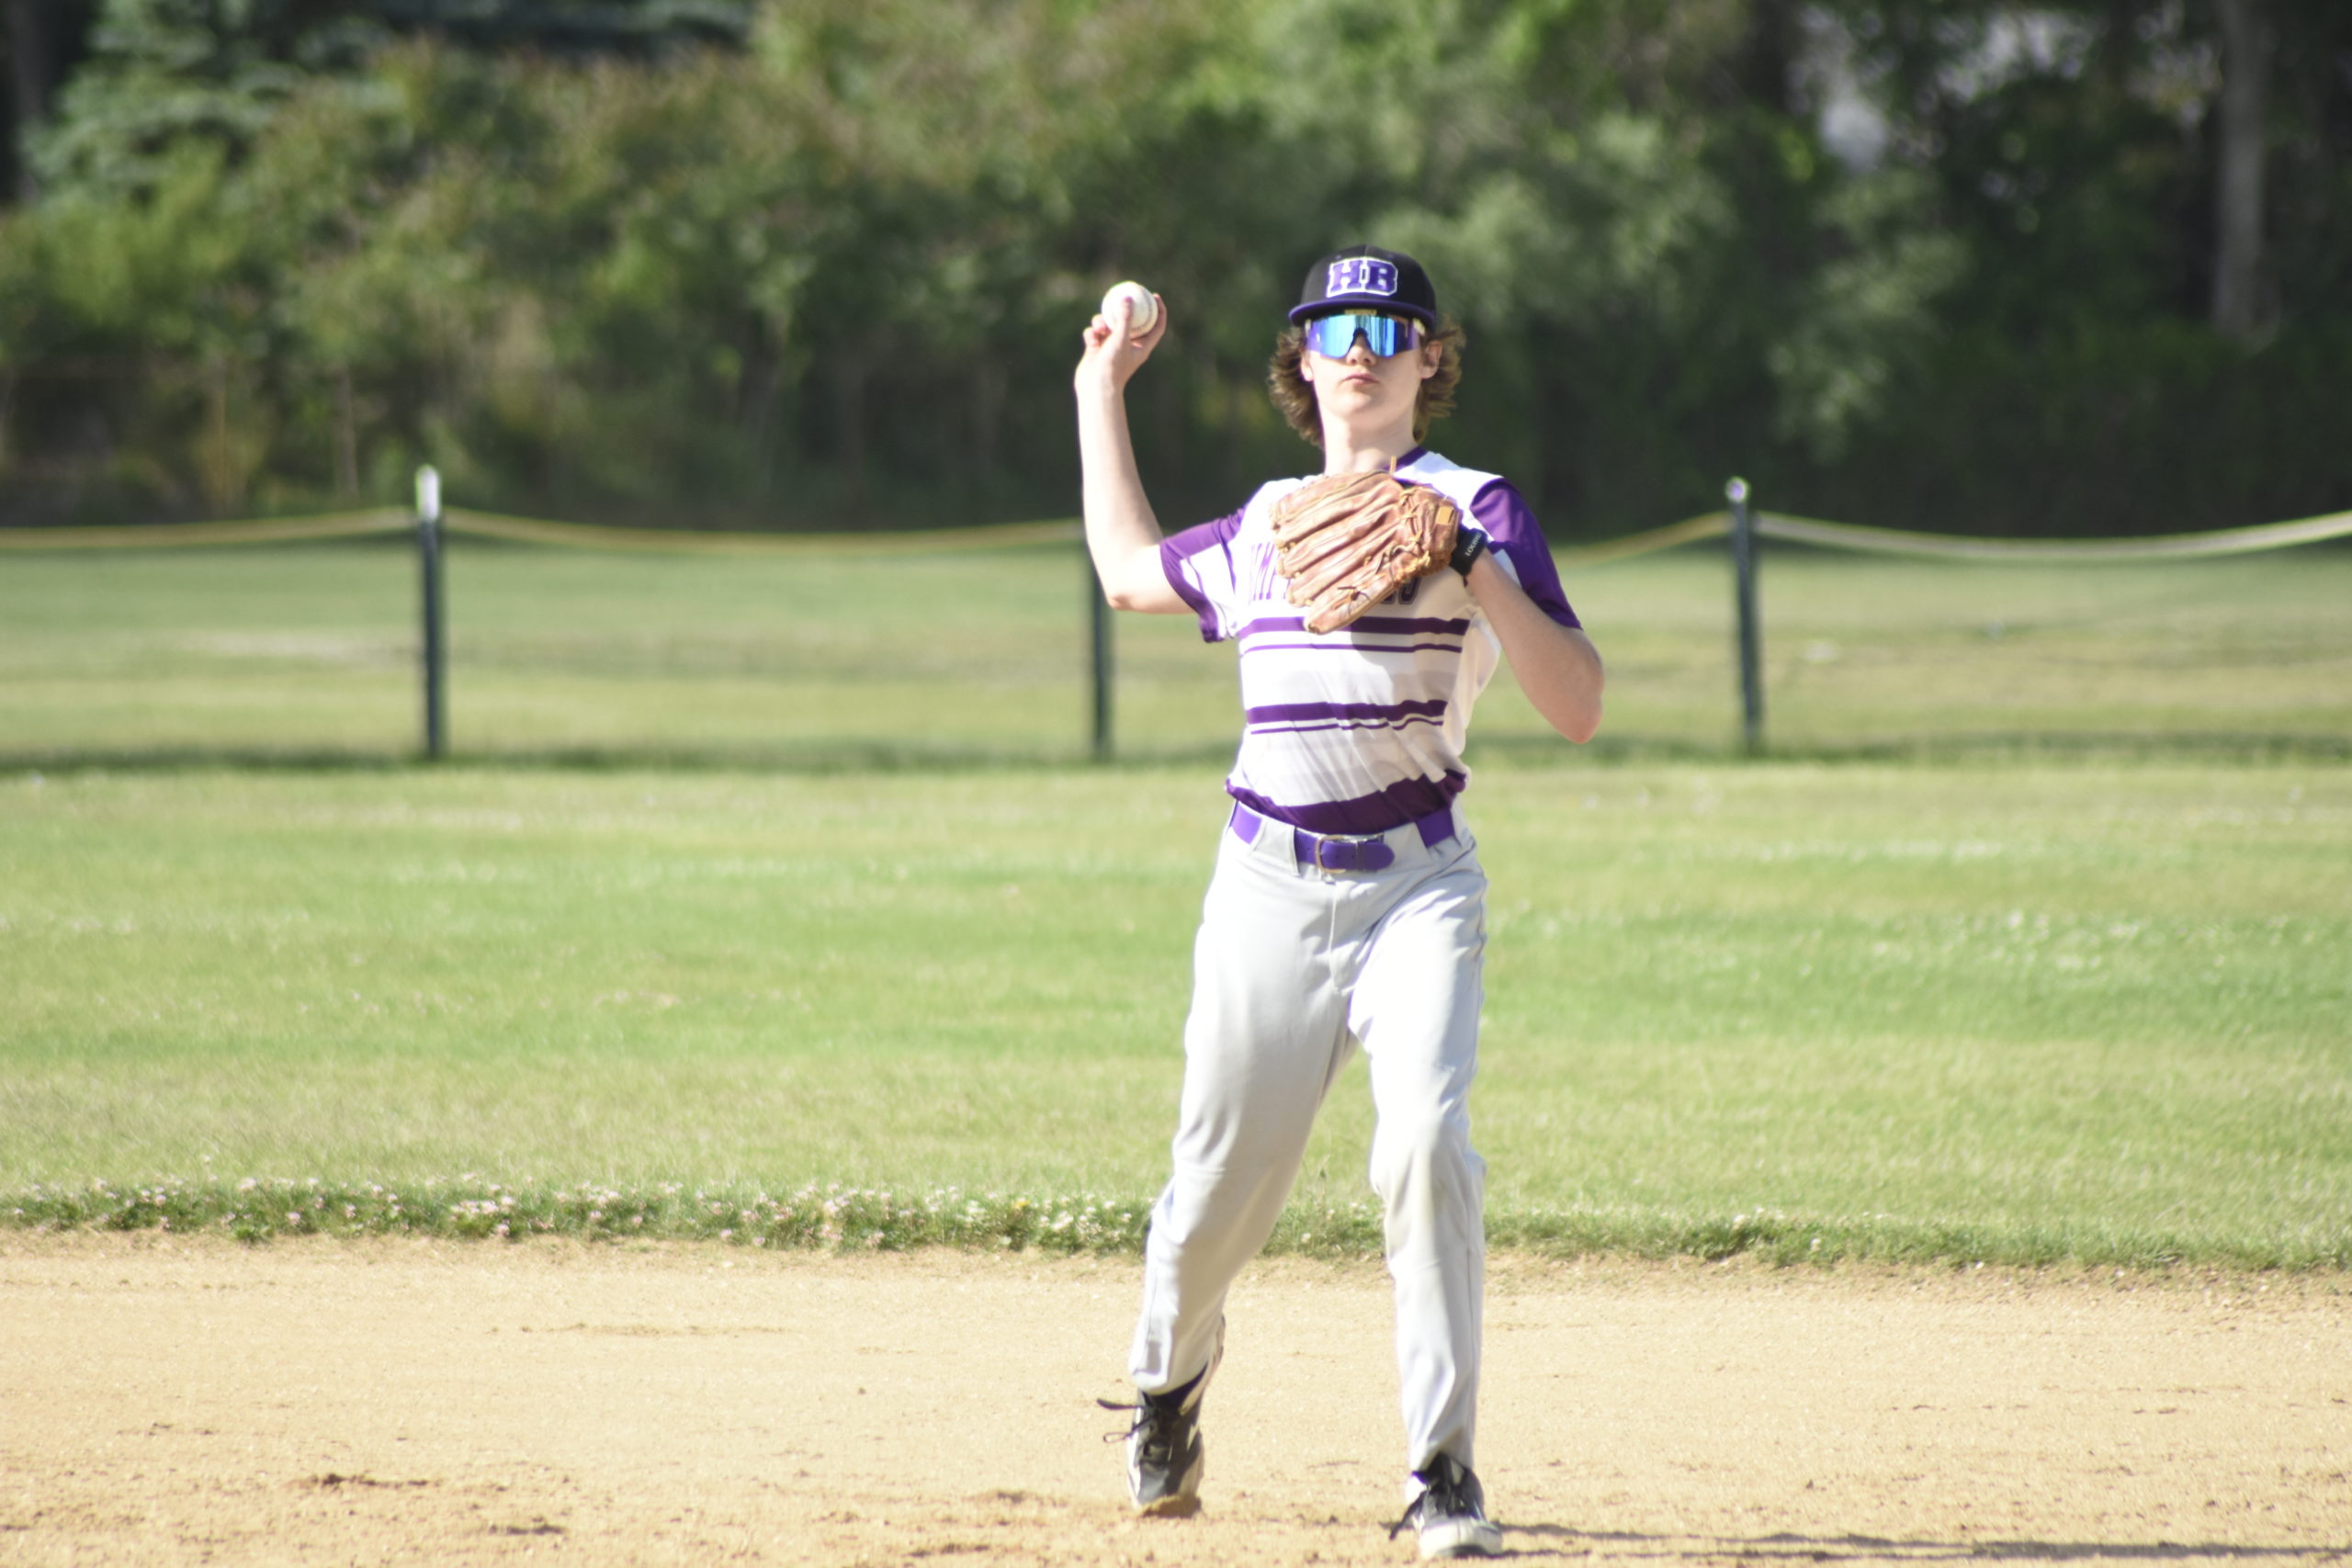 After fielding a ground ball, Hampton Bays second baseman Aidan Kamp throws to first for an out.